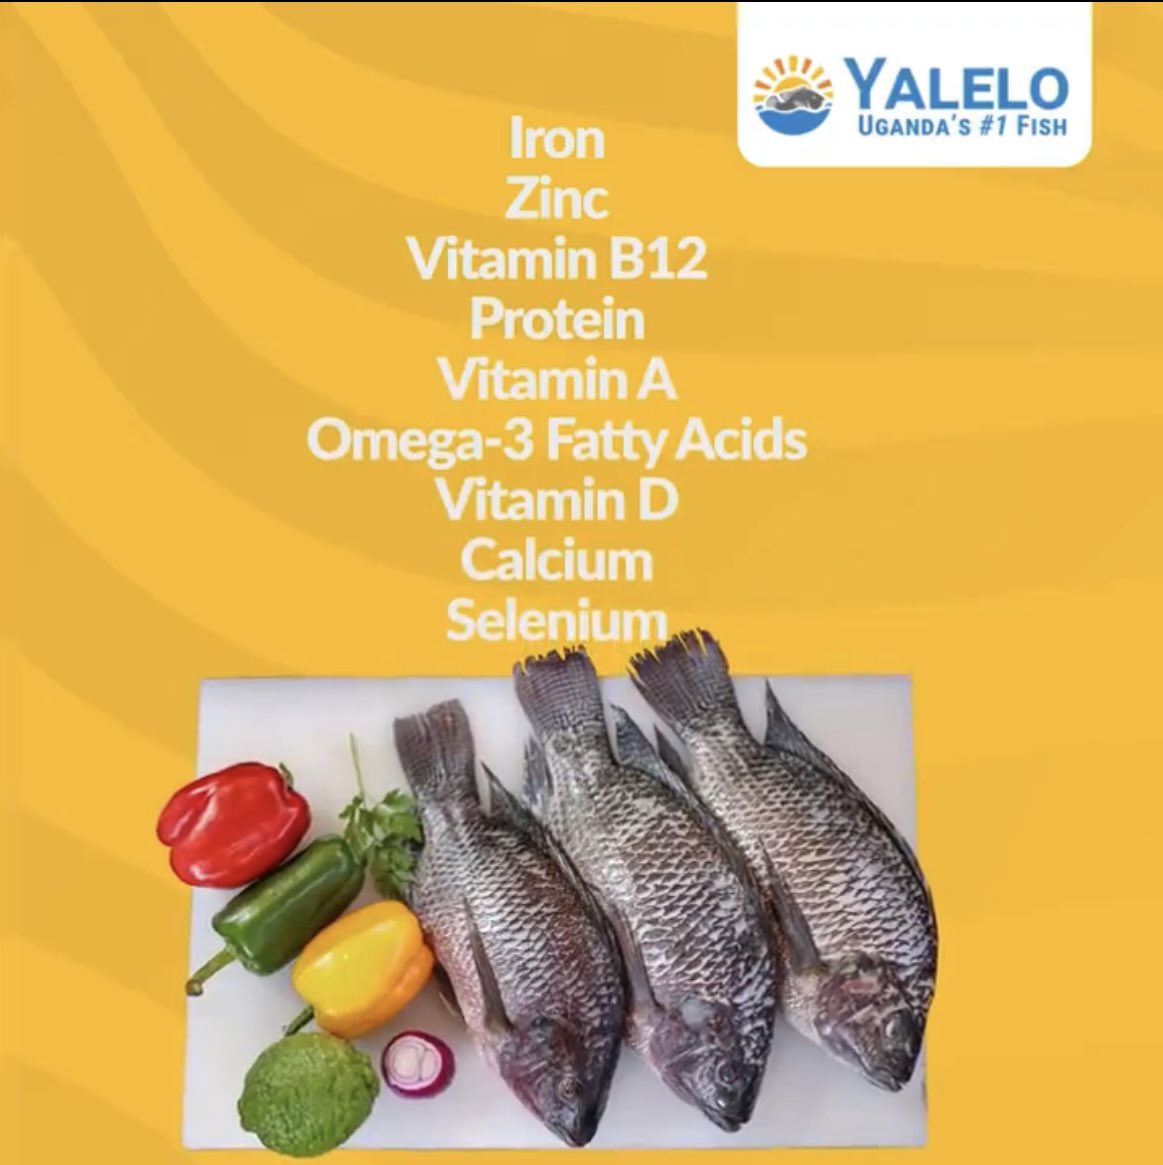 Here’s your weekly reminder to pick up your tilapia 🐟🐟 from @YaleloUganda today 🤗 Fresh and nutritious, something we all need a lot more of! 
I’m playing around with a new recipe on #CrystalsBites 😋😋 #UgandasNo1Fish